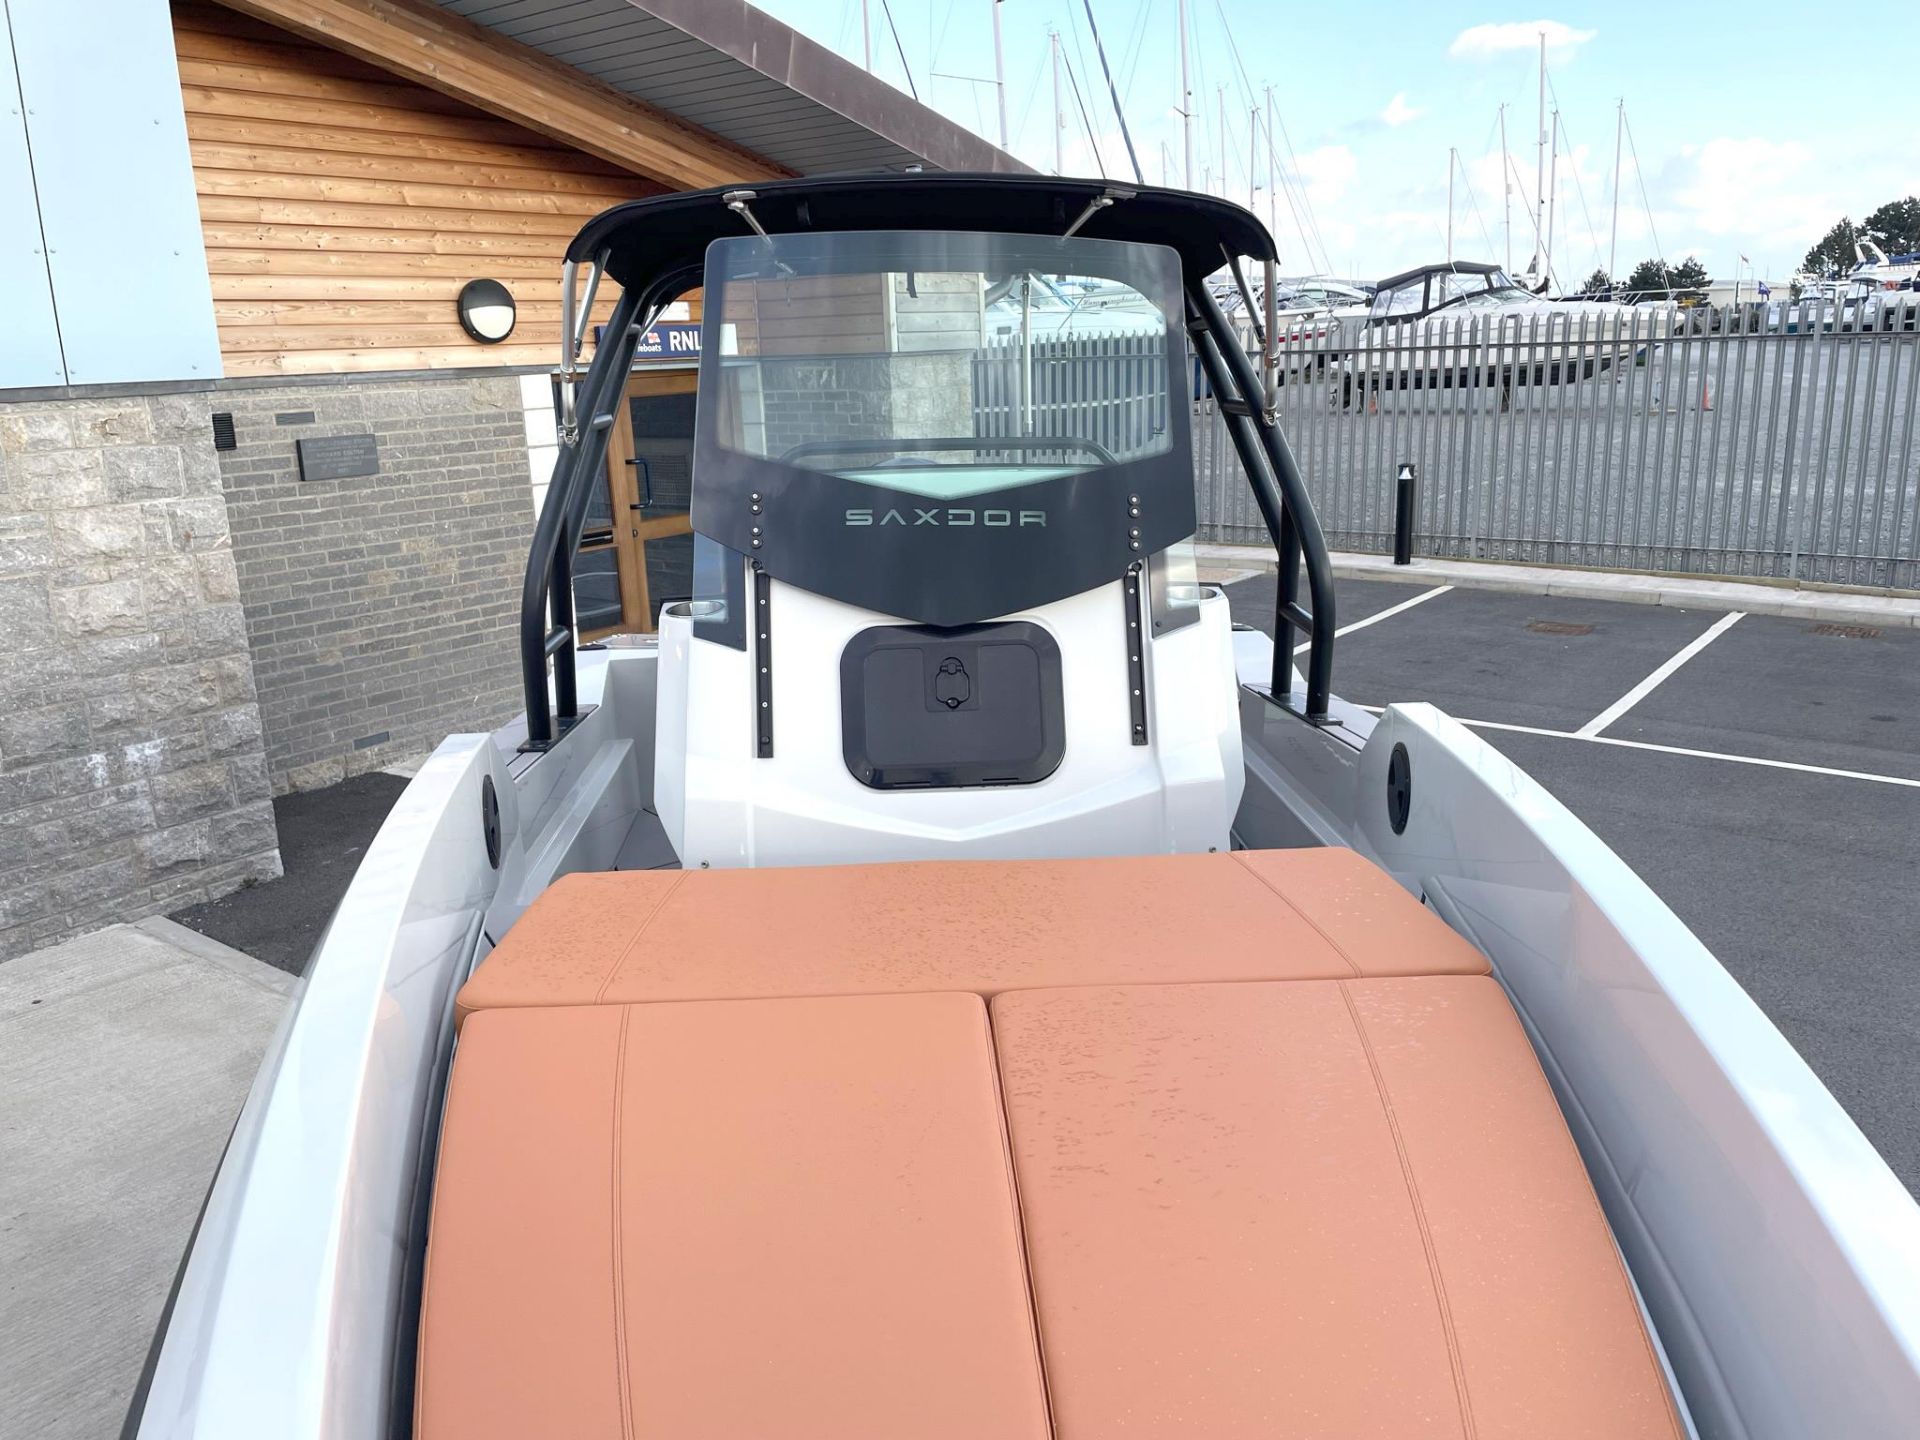 Fantastic opportunity to own a highly desirable watercraft AND support the RNLI Charity - Image 15 of 23